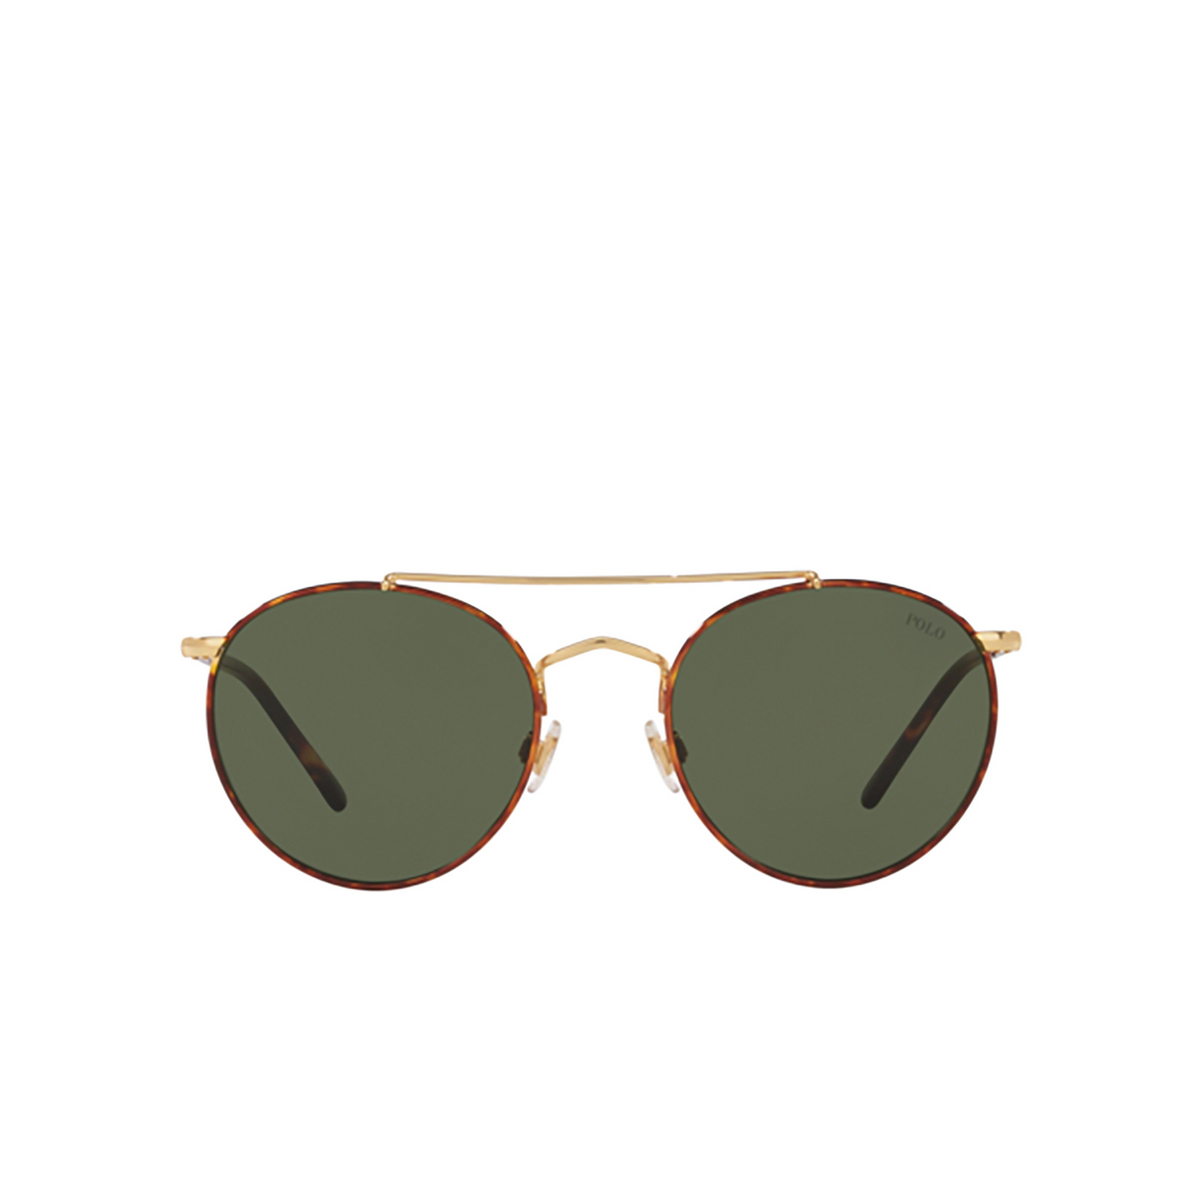 Polo Ralph Lauren® Round Sunglasses: PH3114 color Havana On Shiny Gold 938471 - front view.